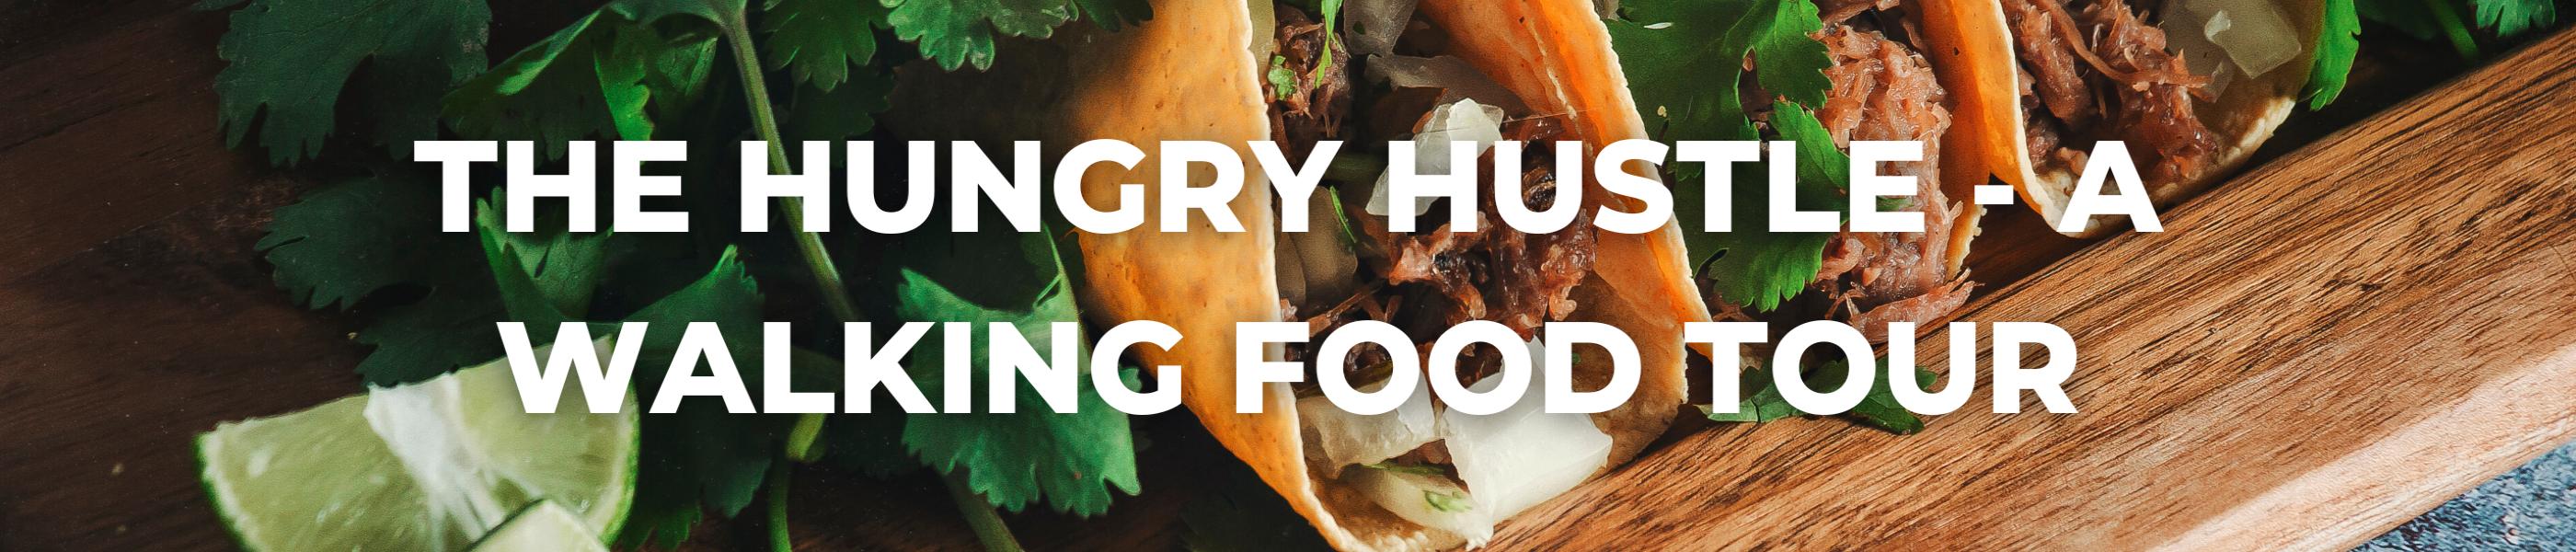 The Hungry Hustle Walking Food Tour